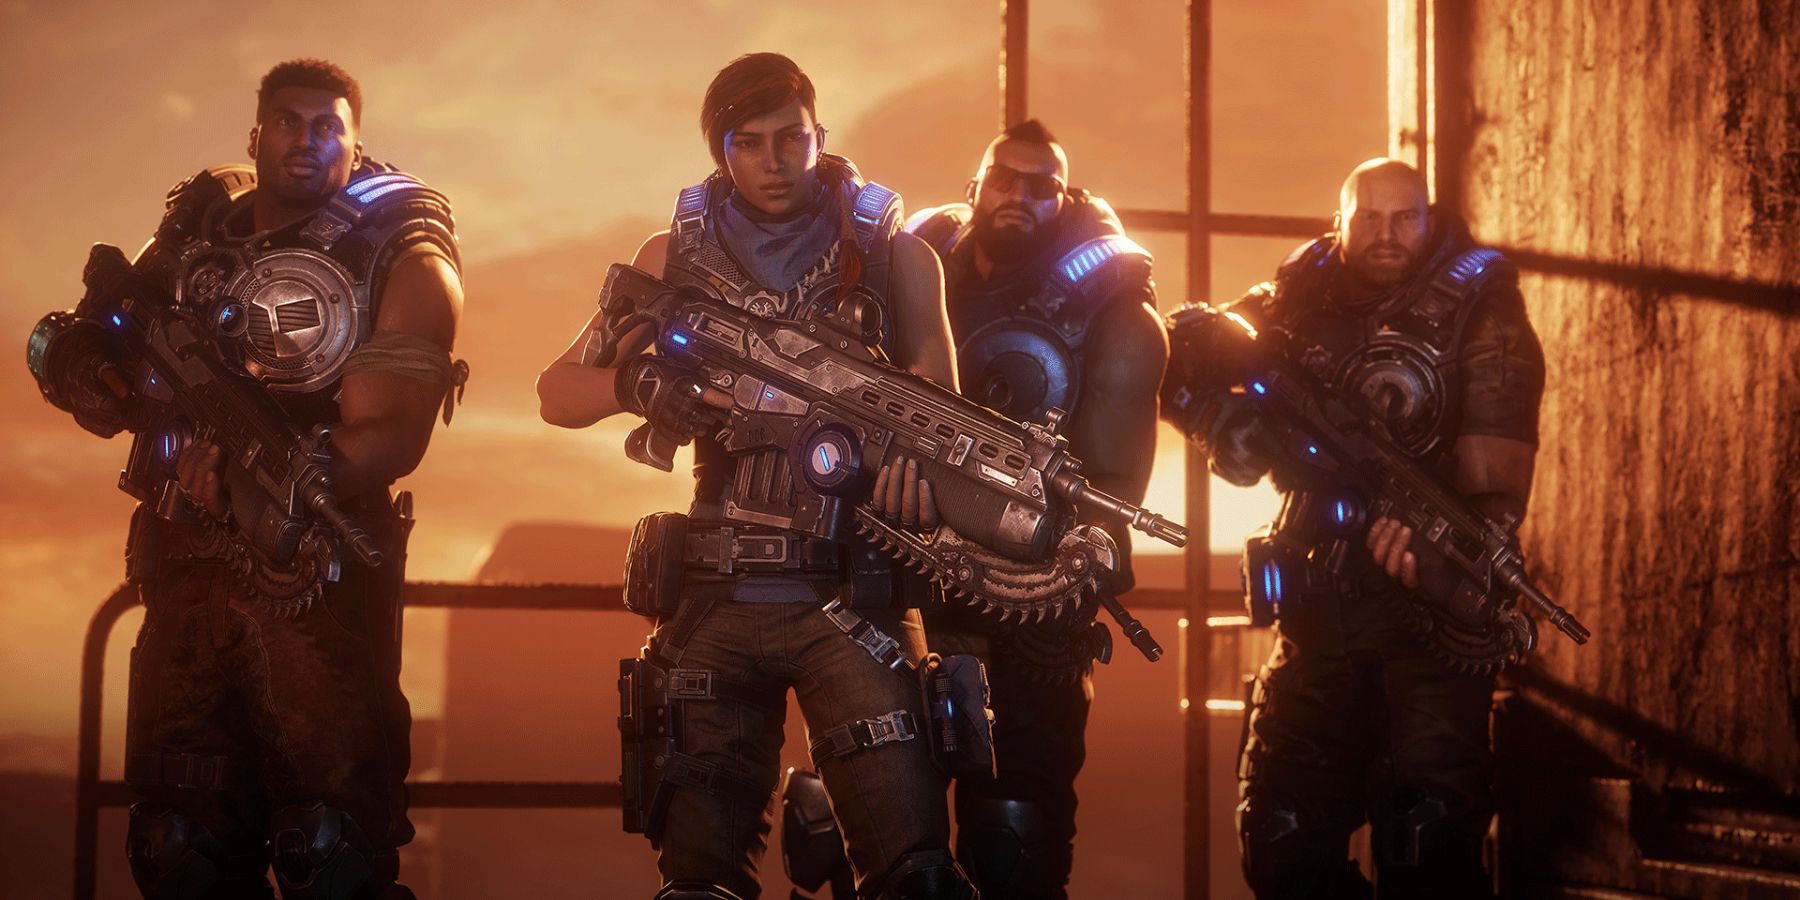 A group of armed soldiers in Gears of War